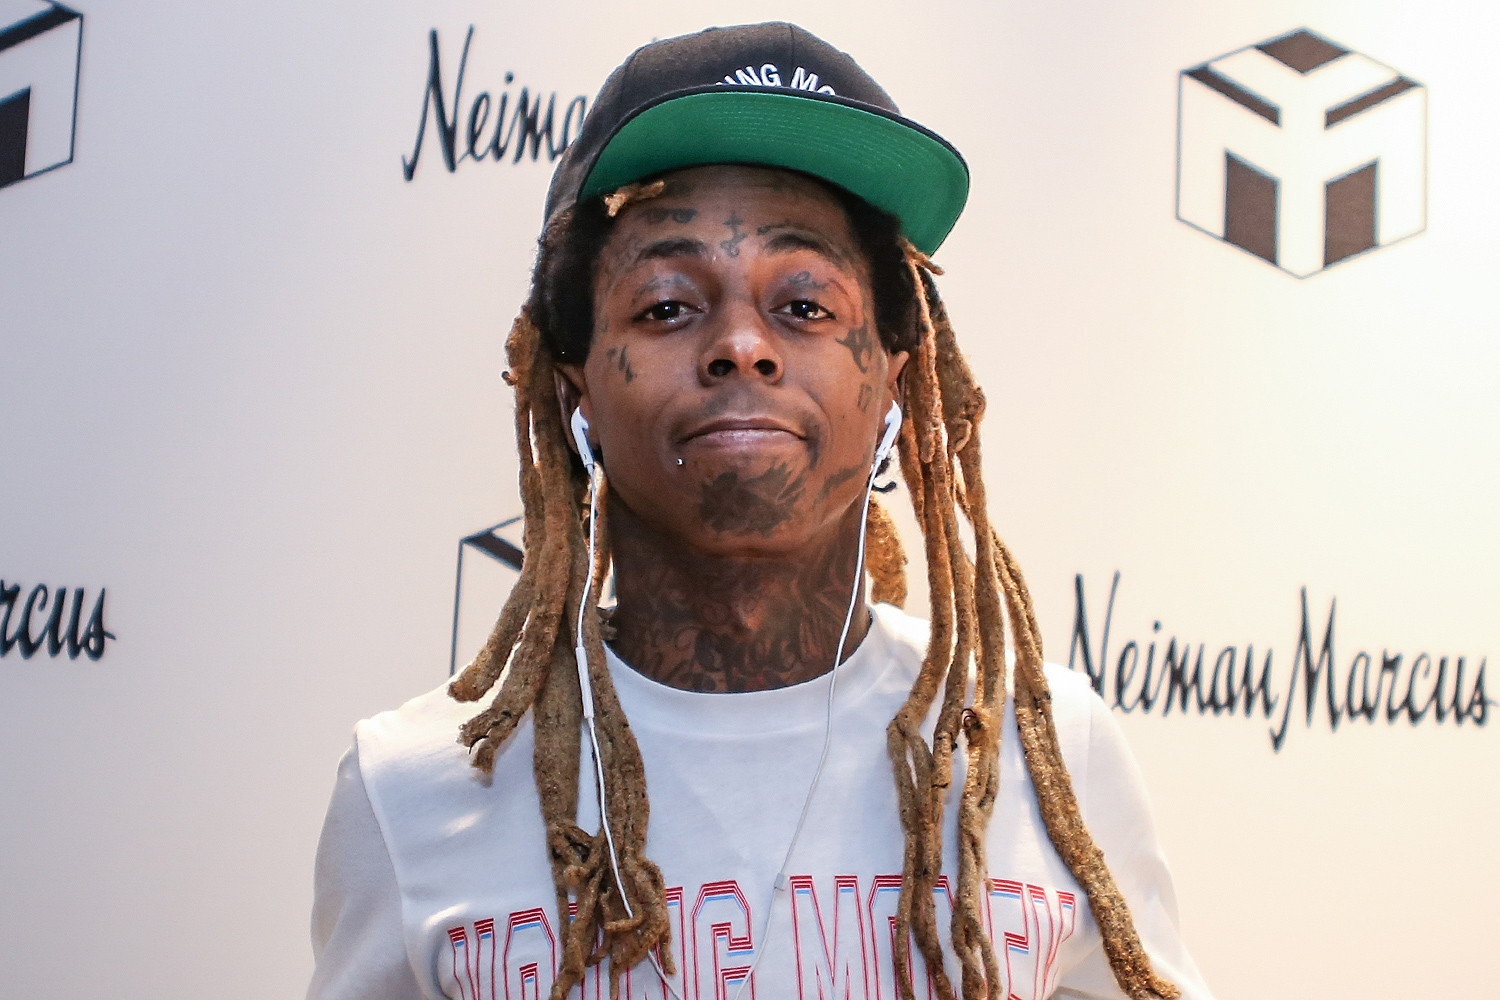 Lil Wayne sued by chef for wrongful termination